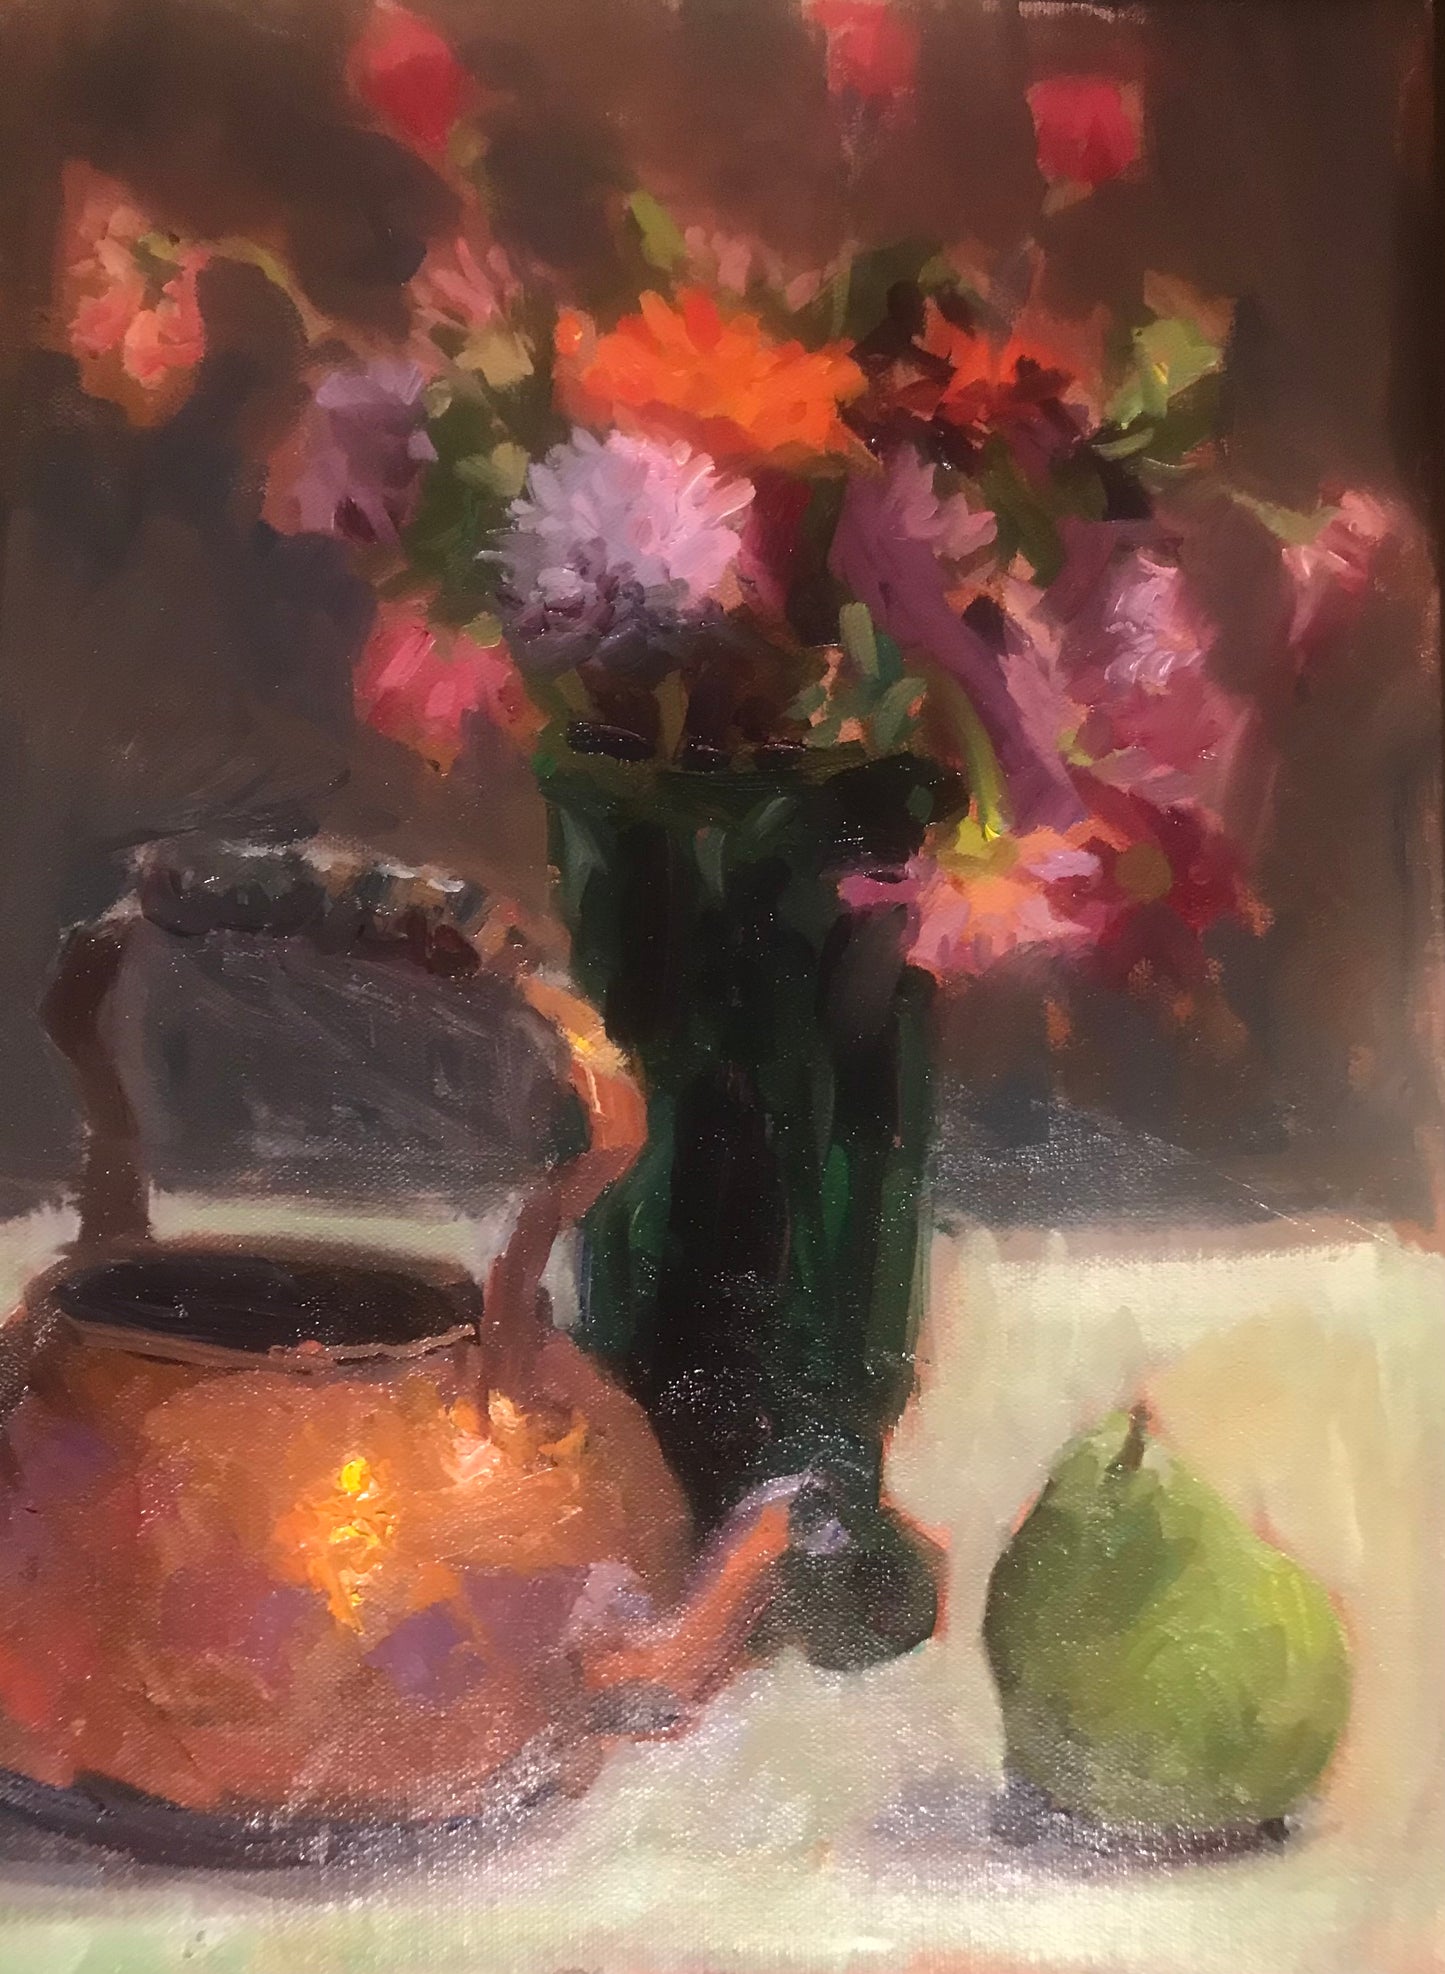 Flowers, Teapot, and Pear (16 x 12 Inches)